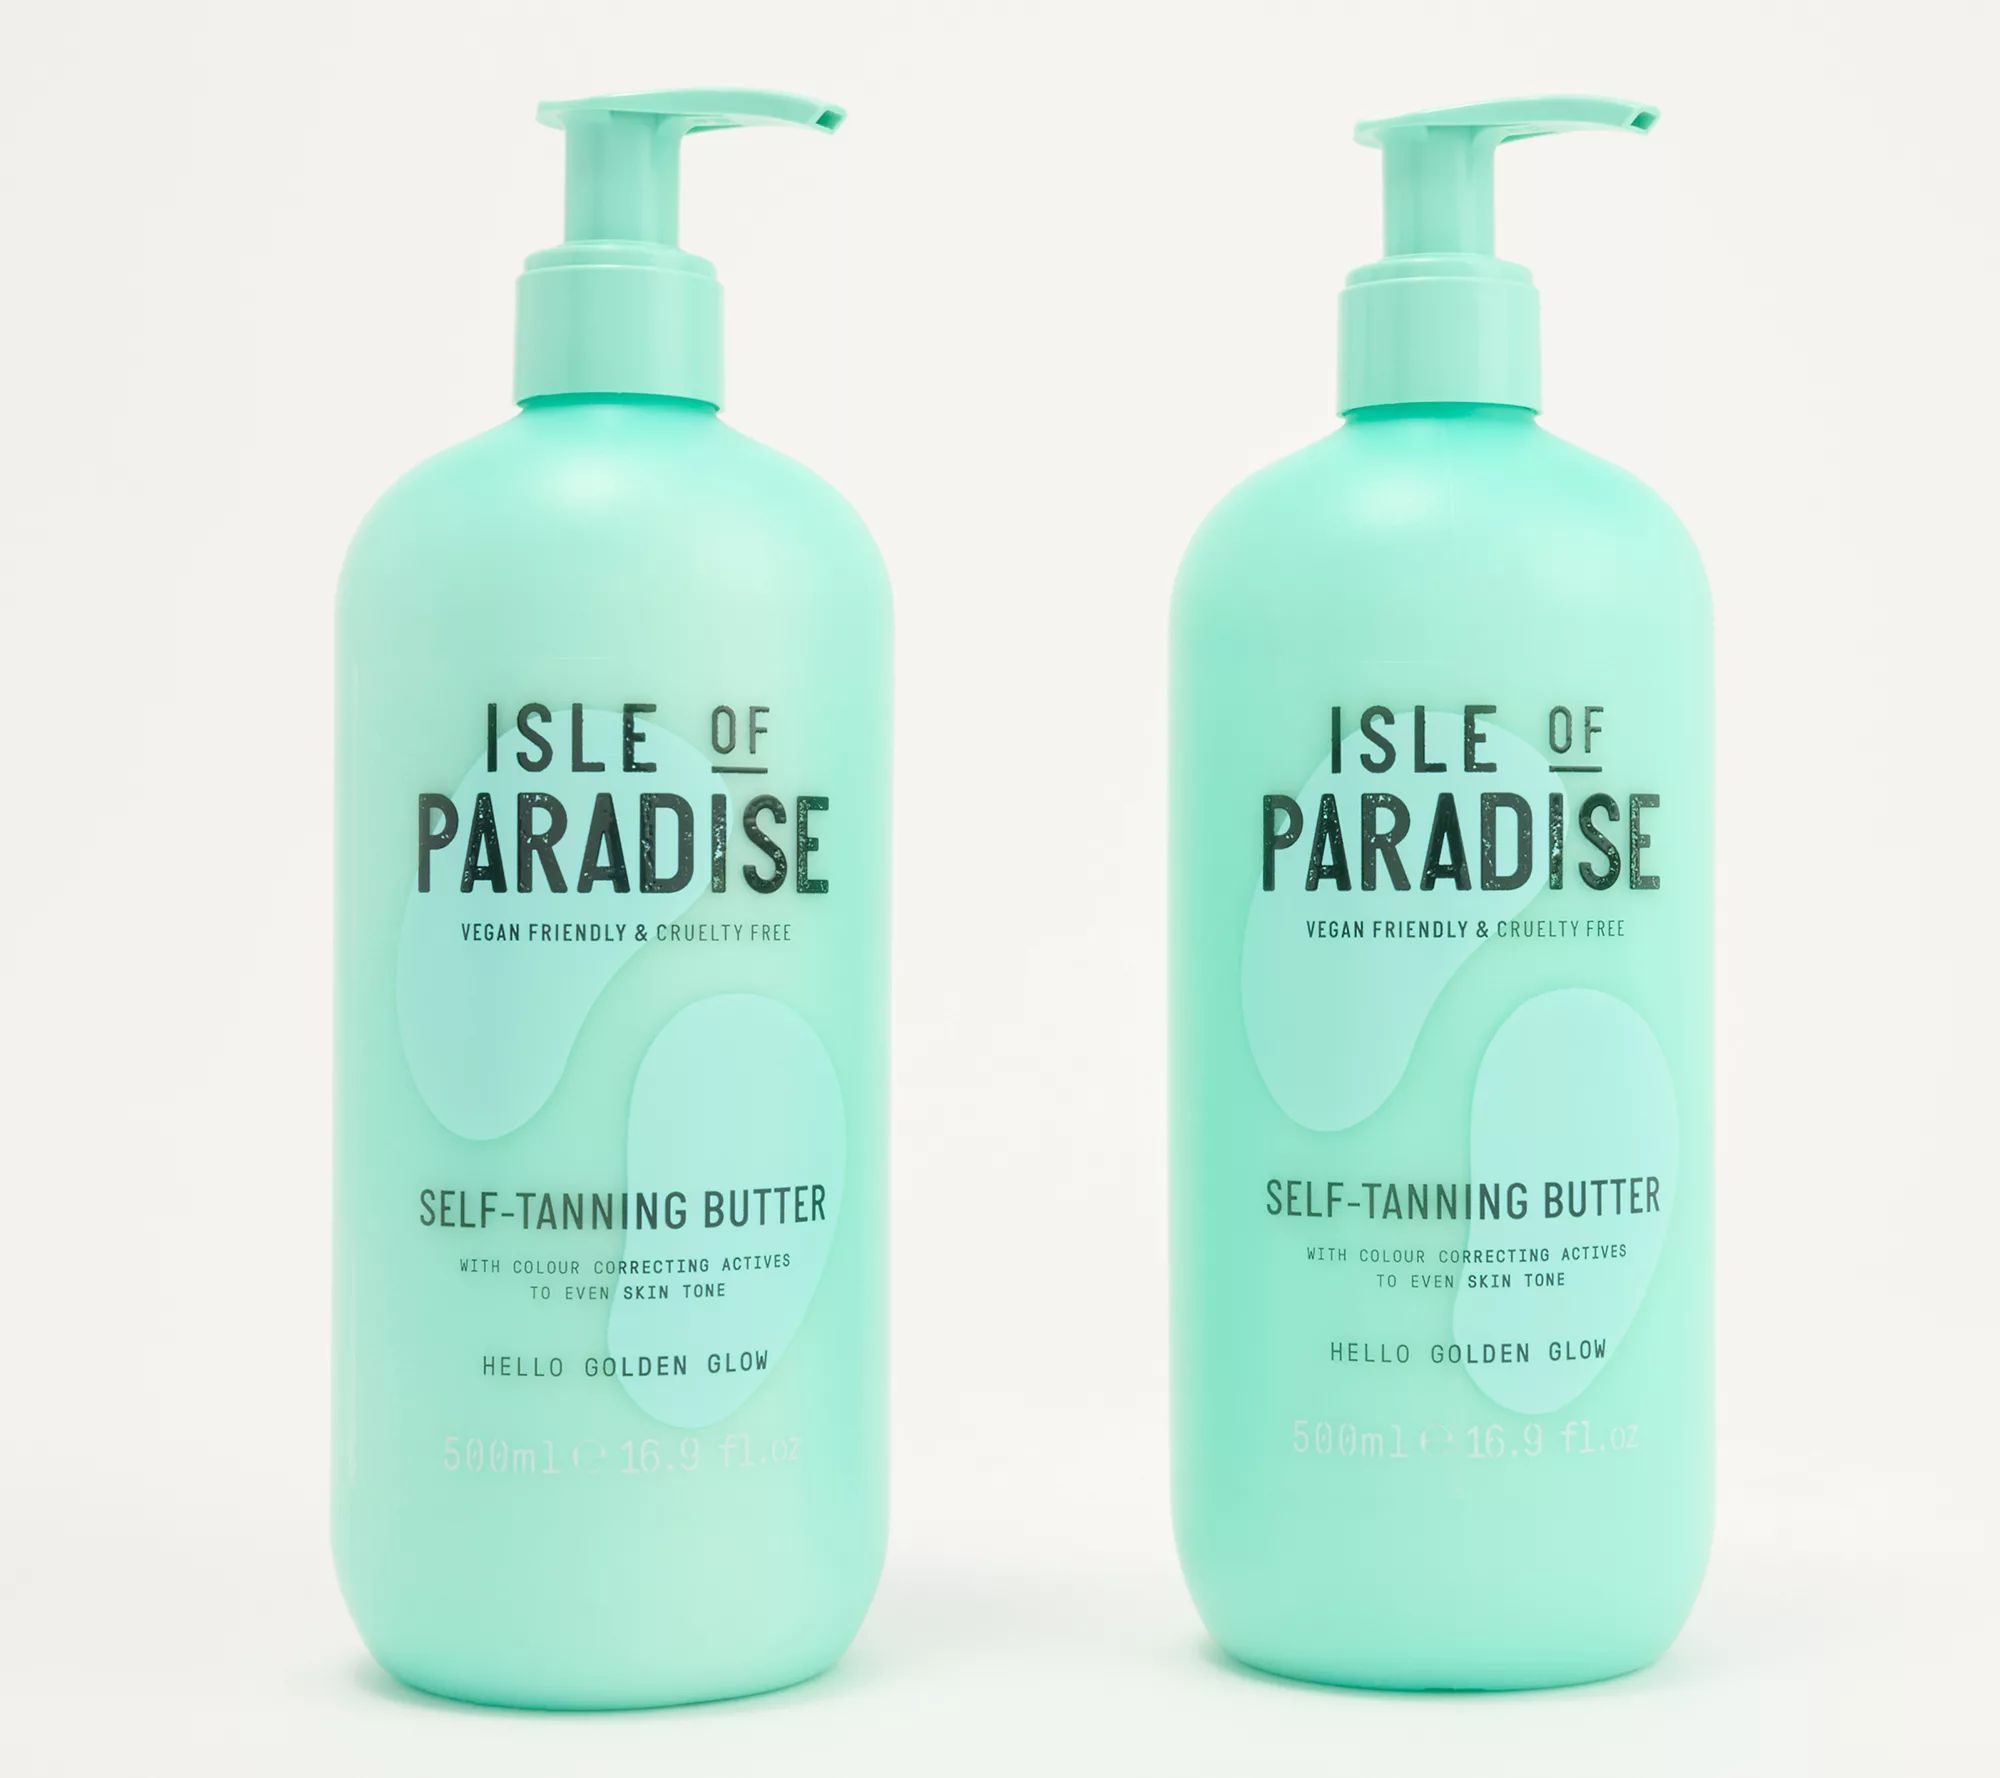 Isle of Paradise Super-Size Self-Tanning Butter Duo | QVC